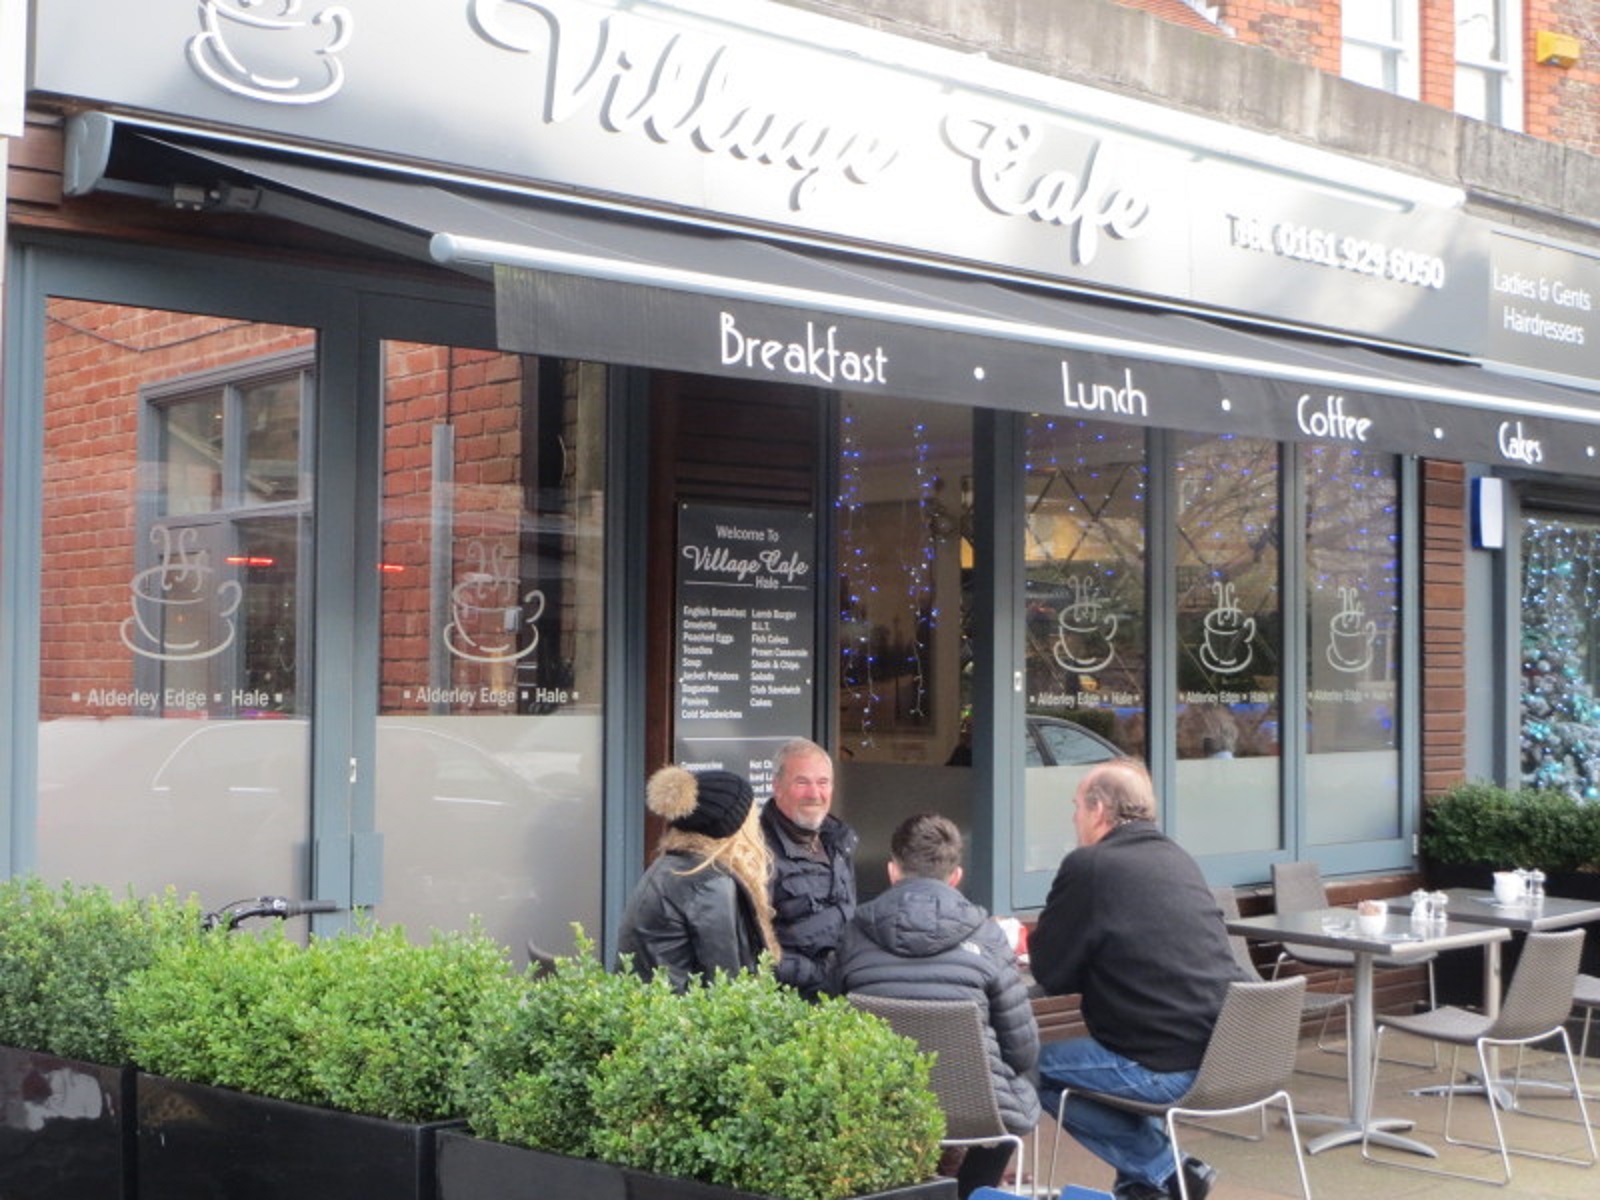 Village Cafe in Hale, Cheshire